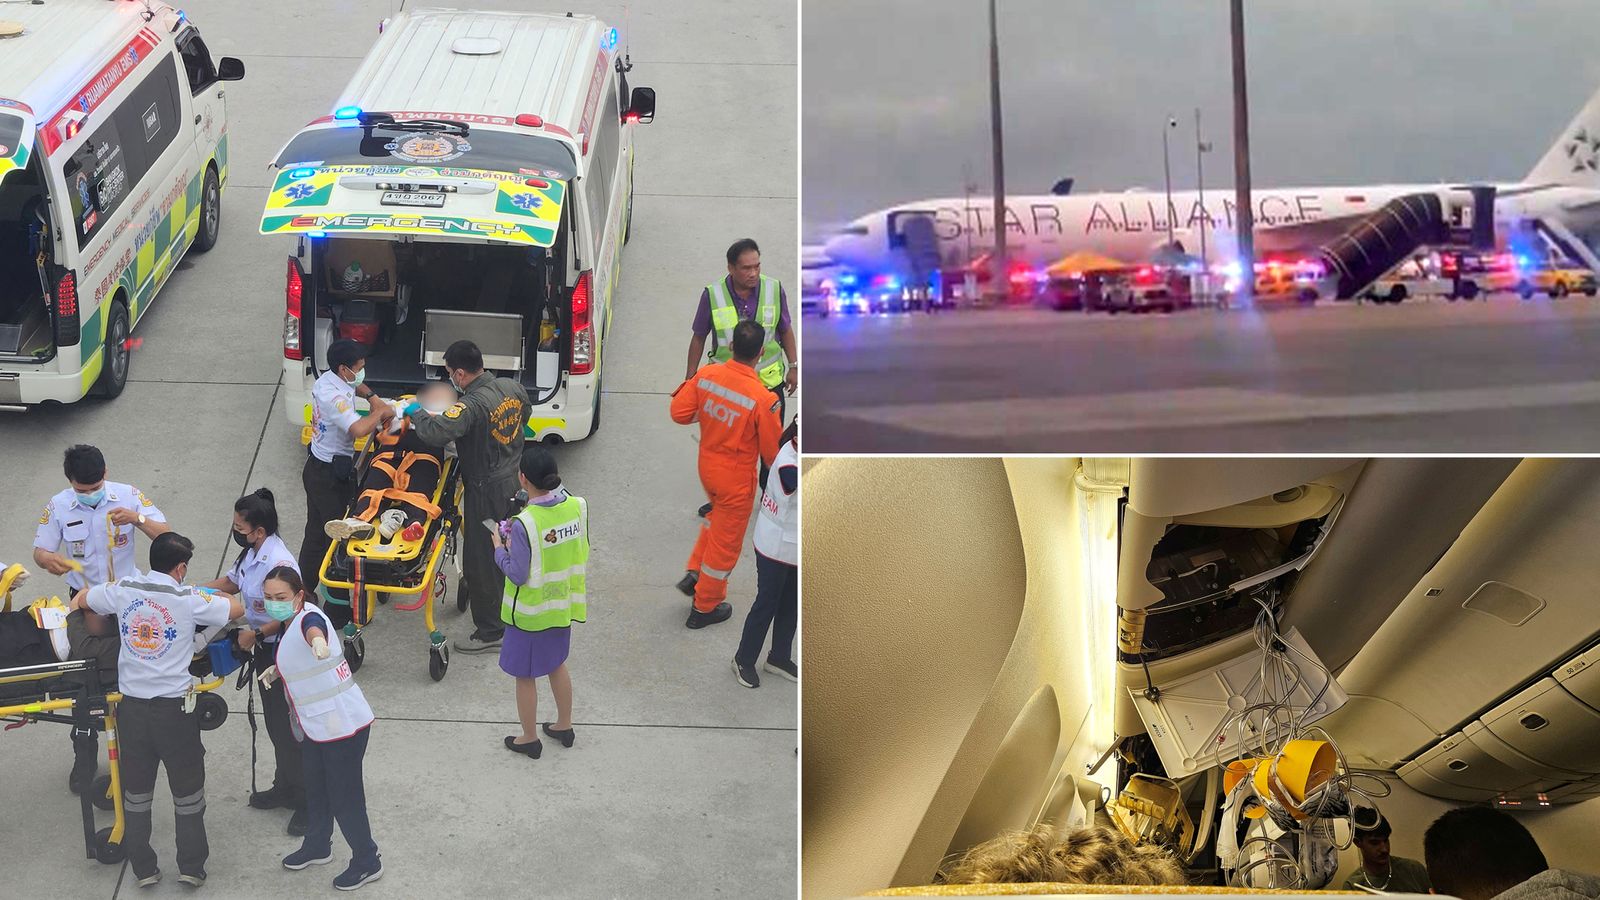 Singapore Airlines: British man dies in severe turbulence as flight from London Heathrow forced to land in Bangkok